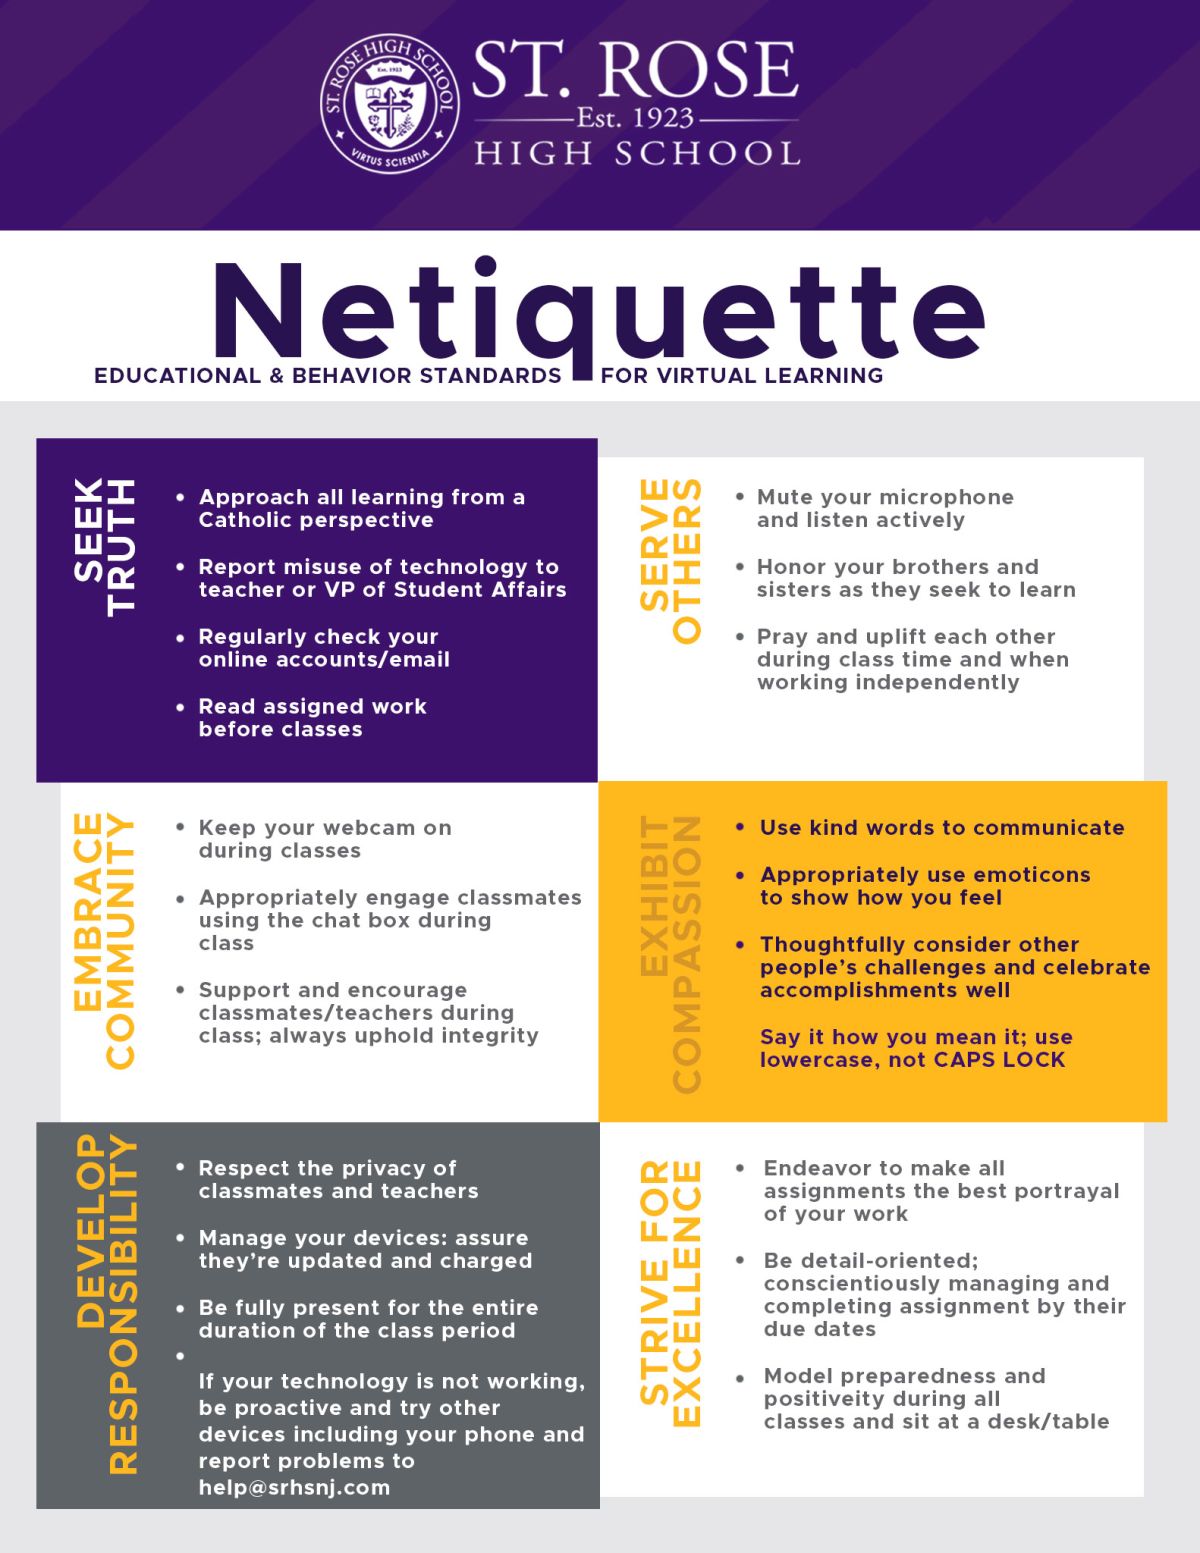 netiquette stands for